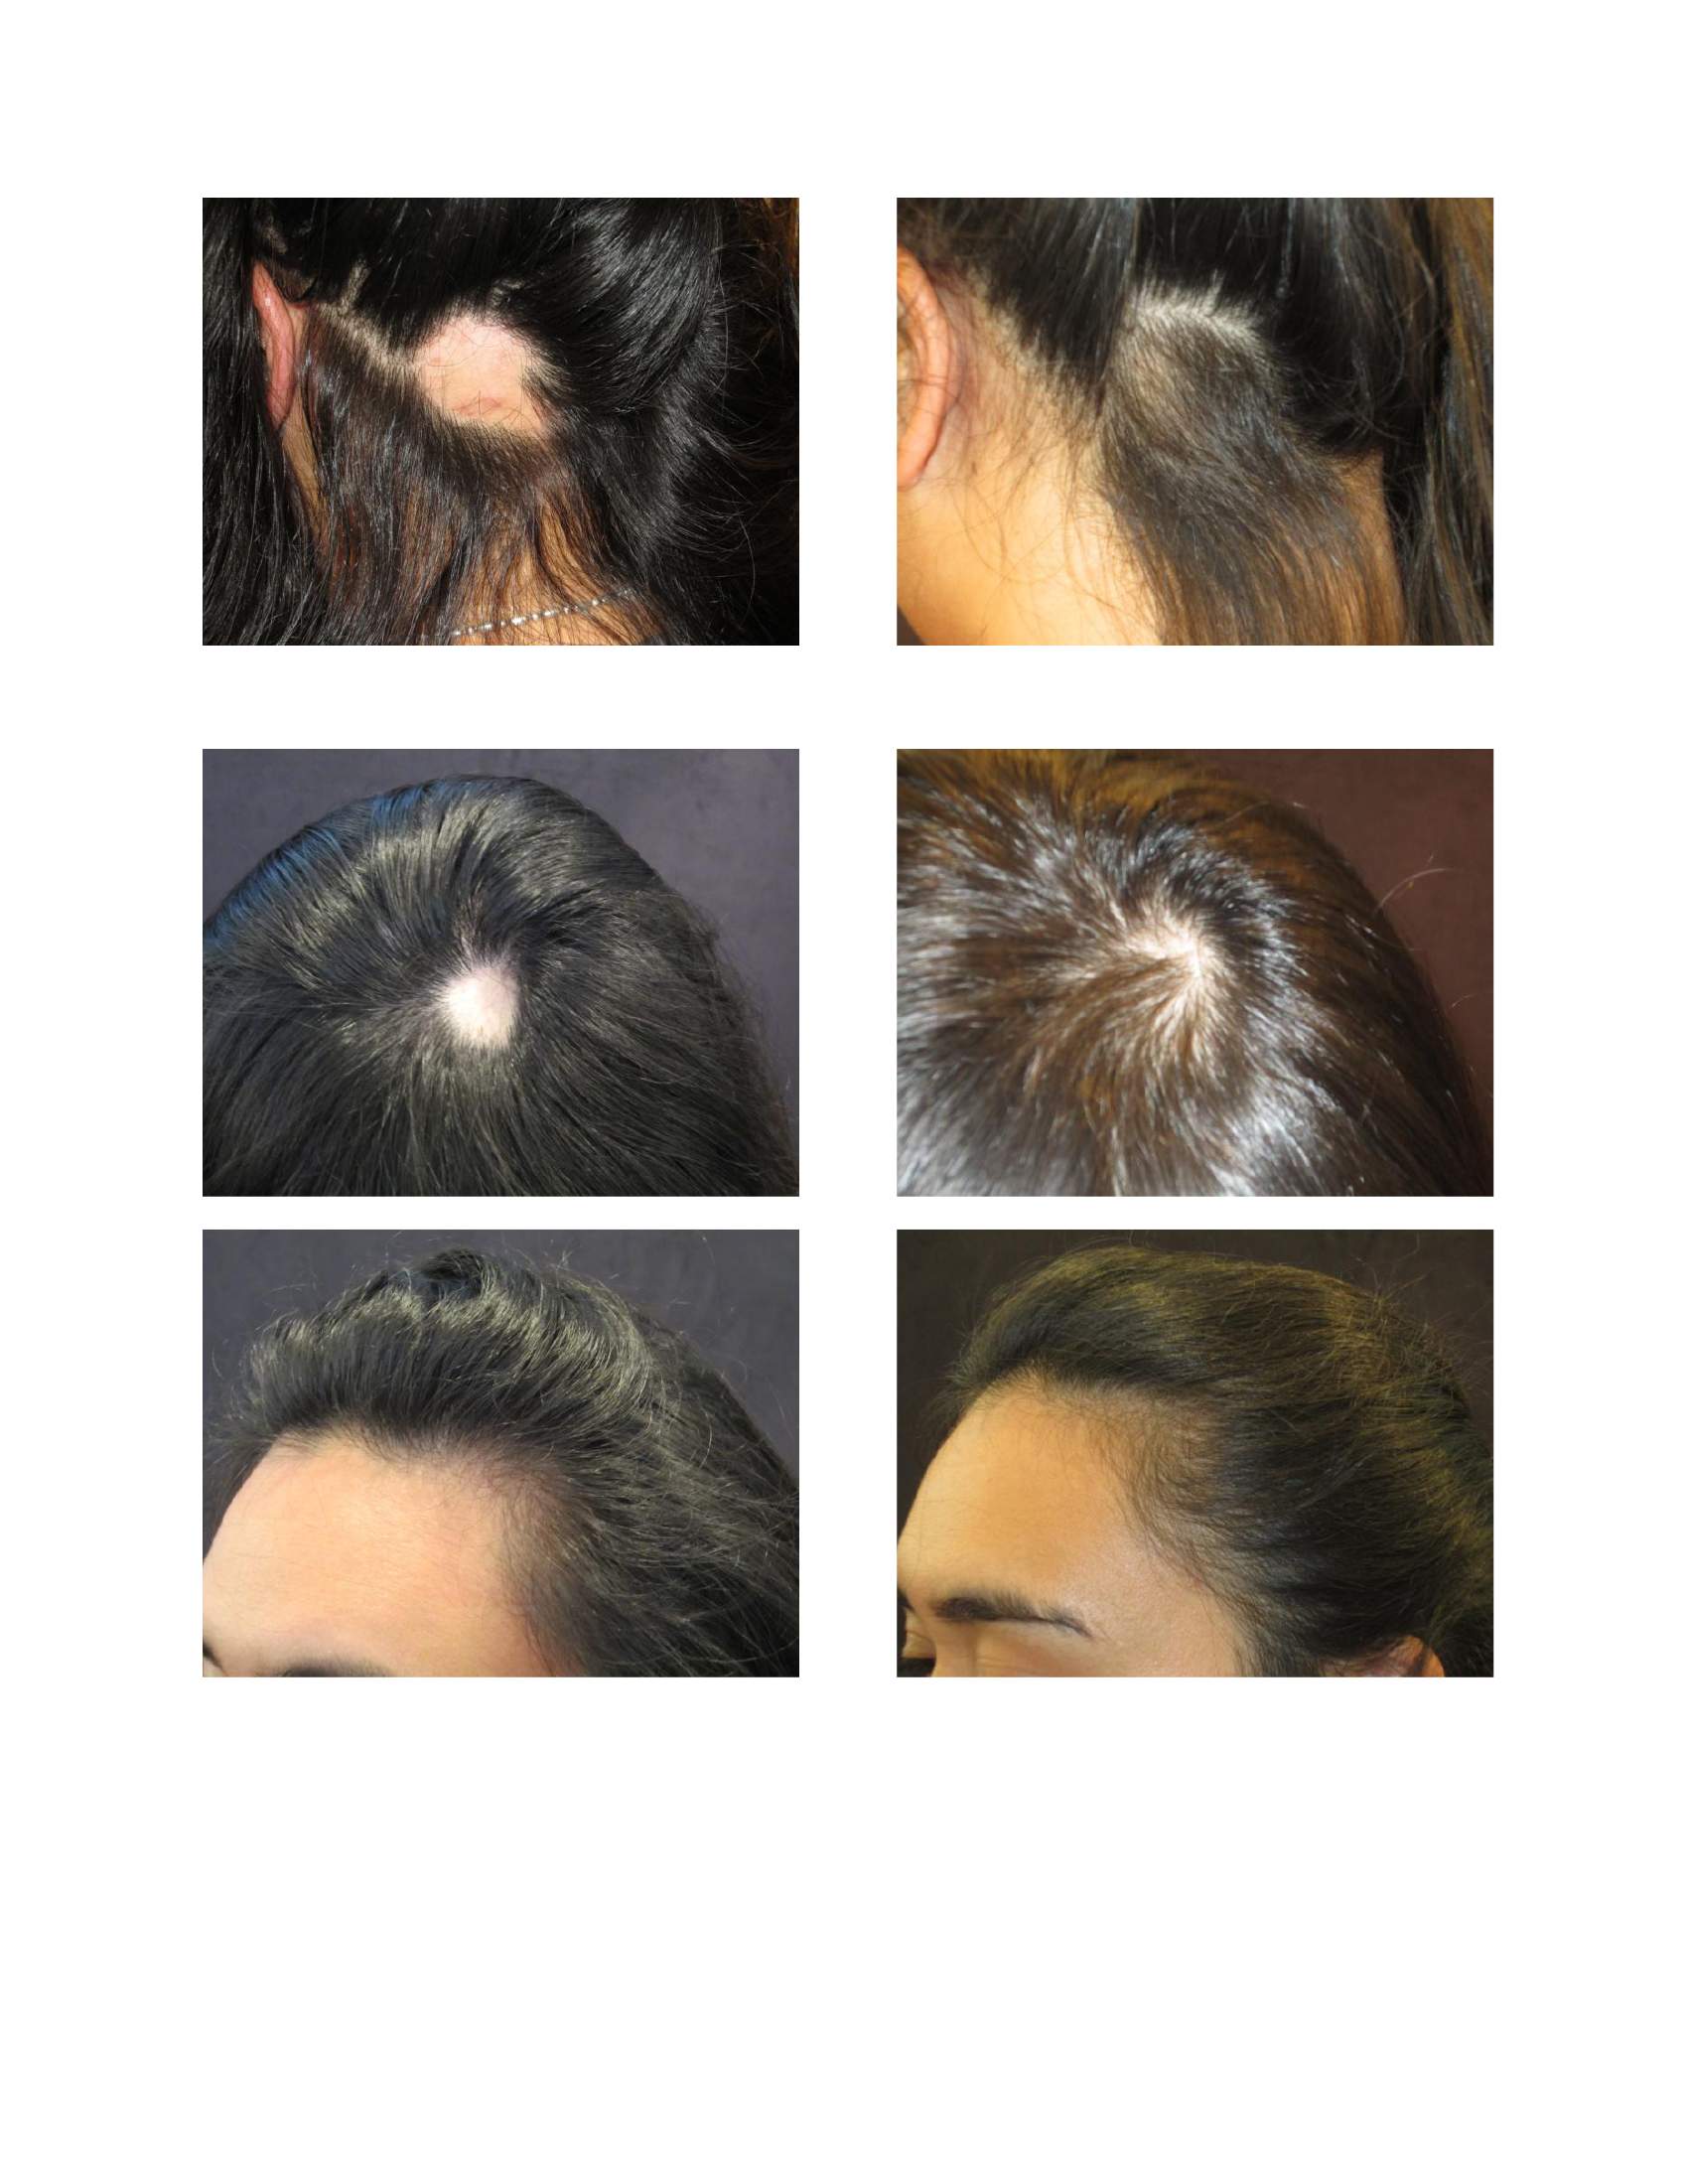 Alopecia Areata and Hair Loss Treatments with Trichologist